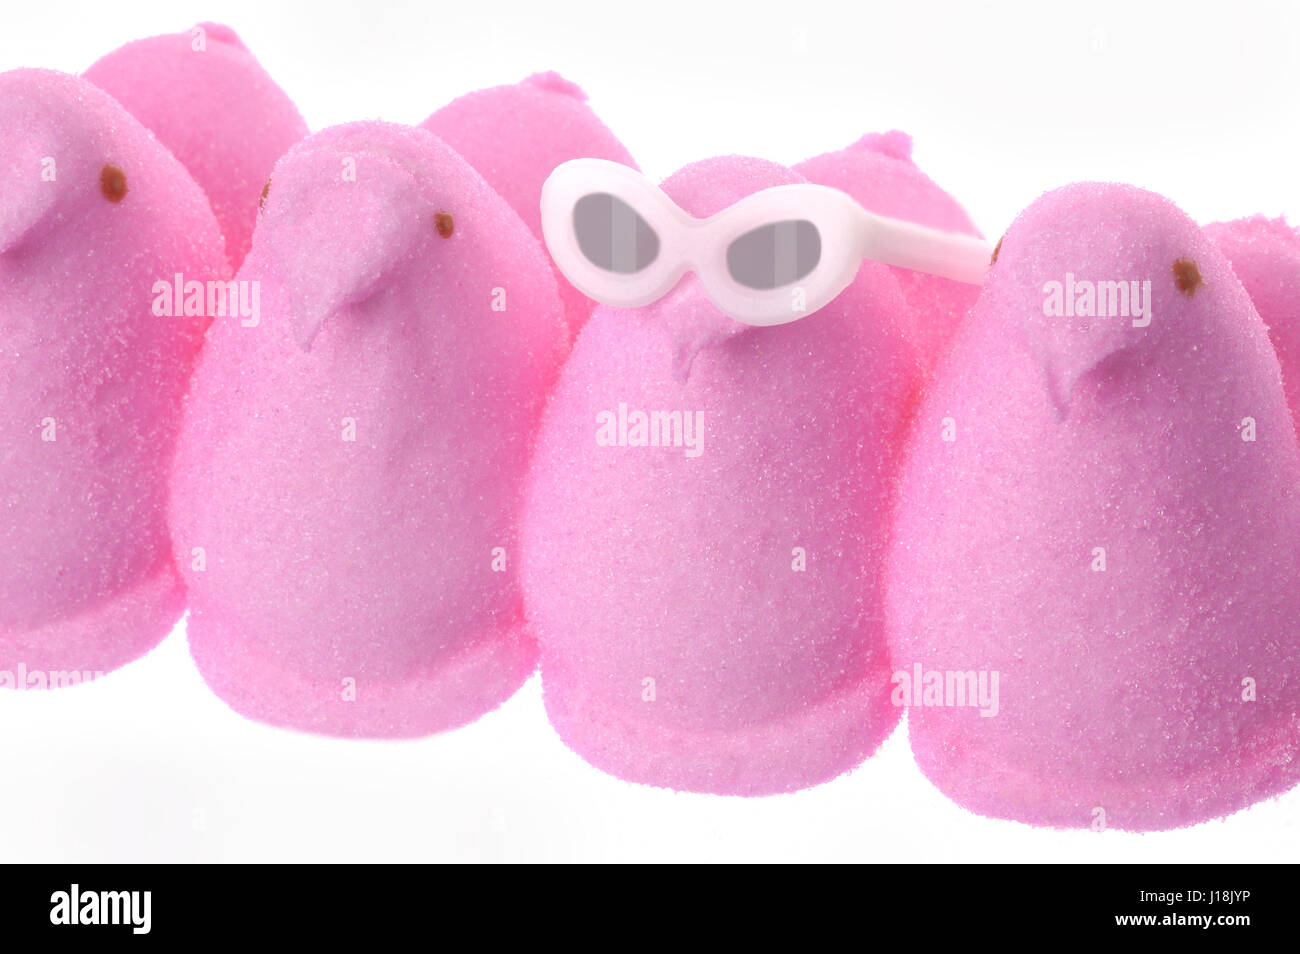 Peeps marshmallow chick candy, classic springtime or Easter treat. One individual peep stands out from the crowd, wearing sunglasses. Stock Photo